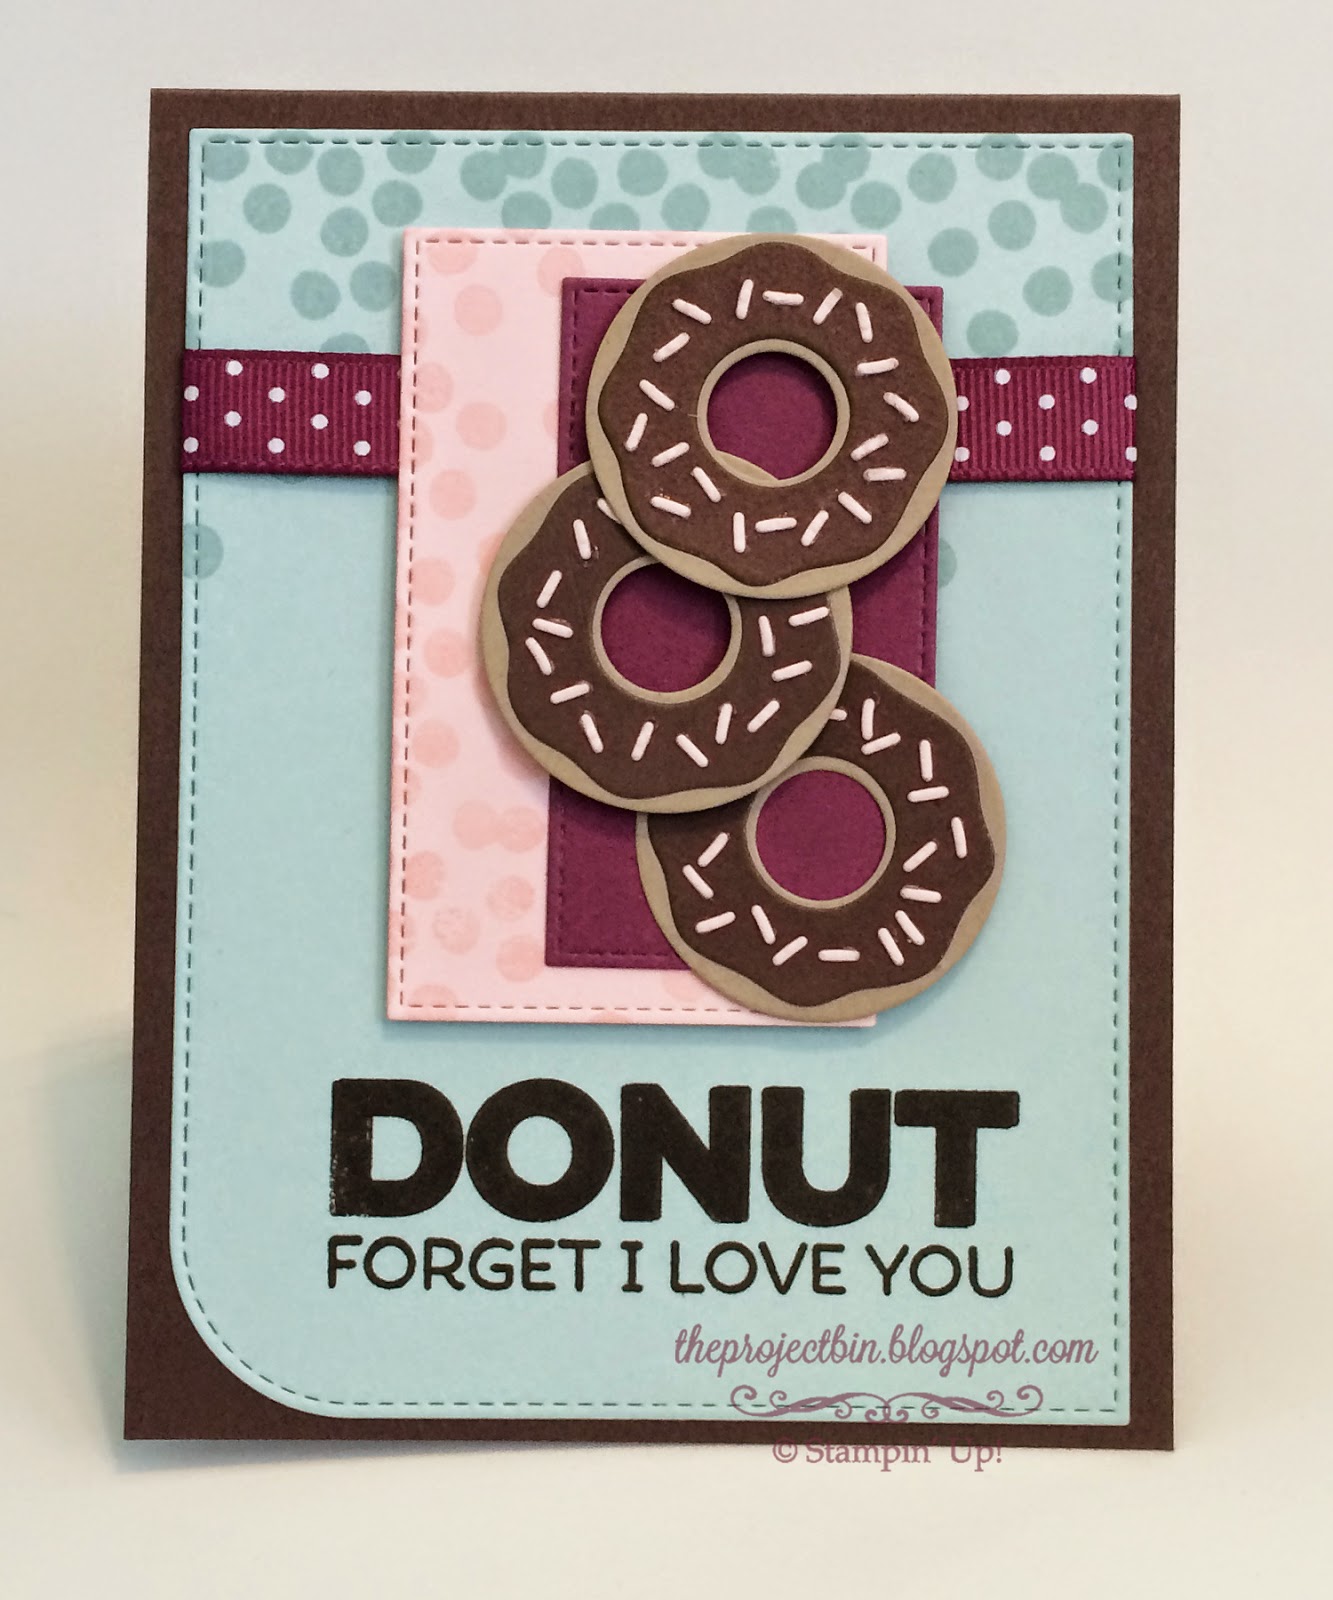 the-project-bin-donut-forget-i-love-you